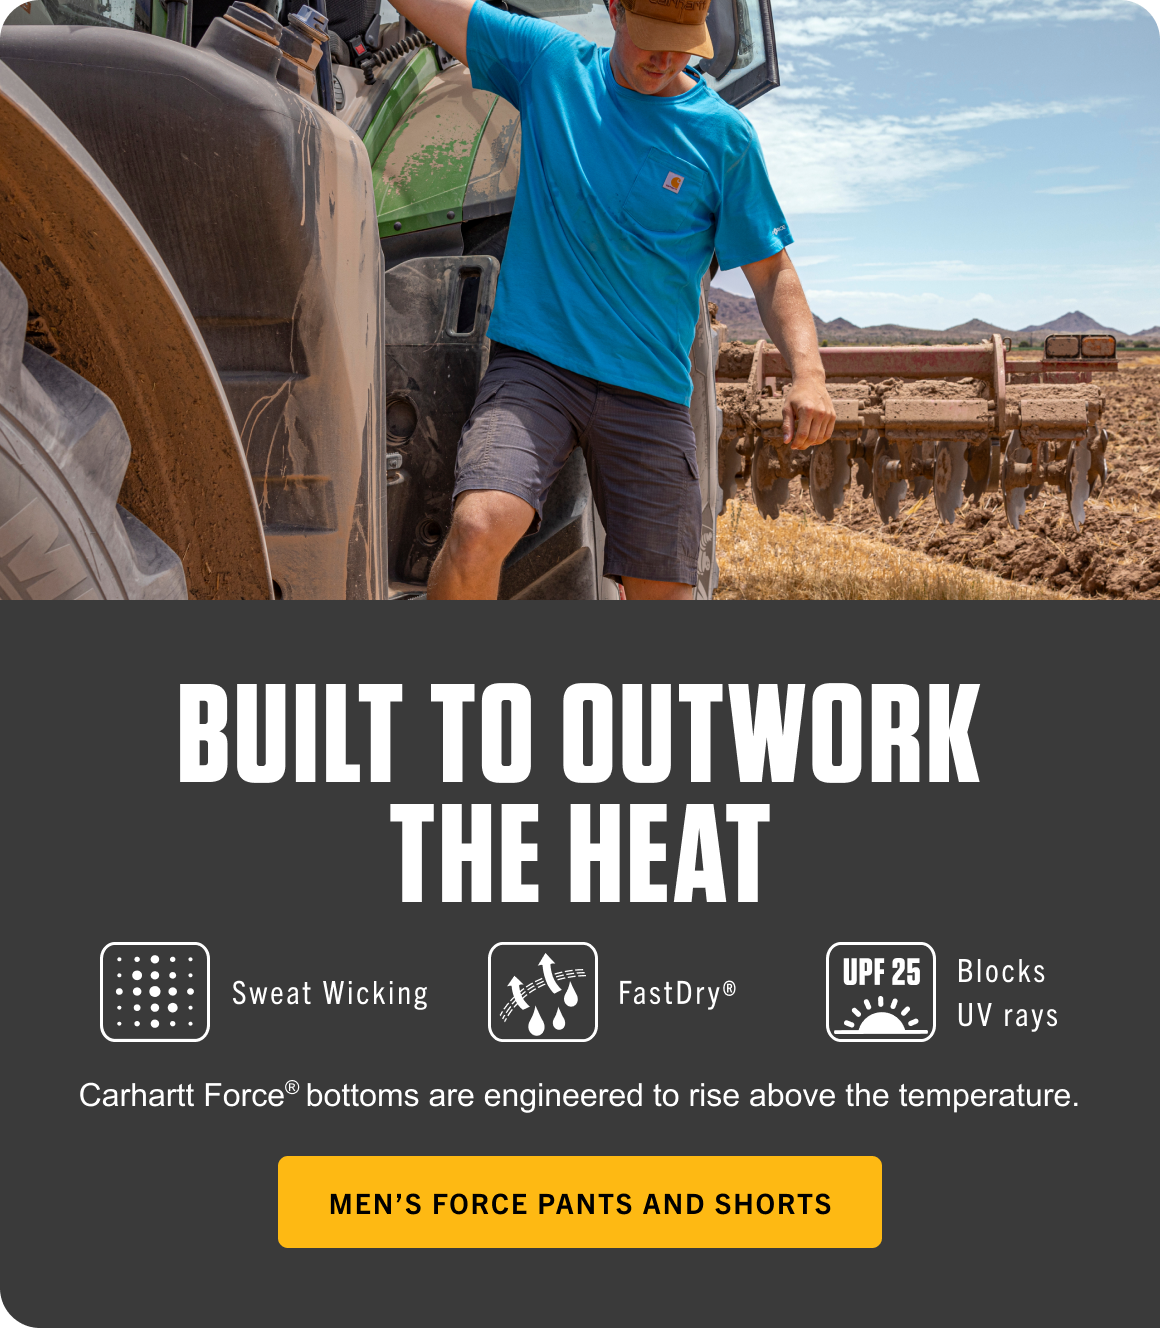 BUILT TO OUTWORK THE HEAT